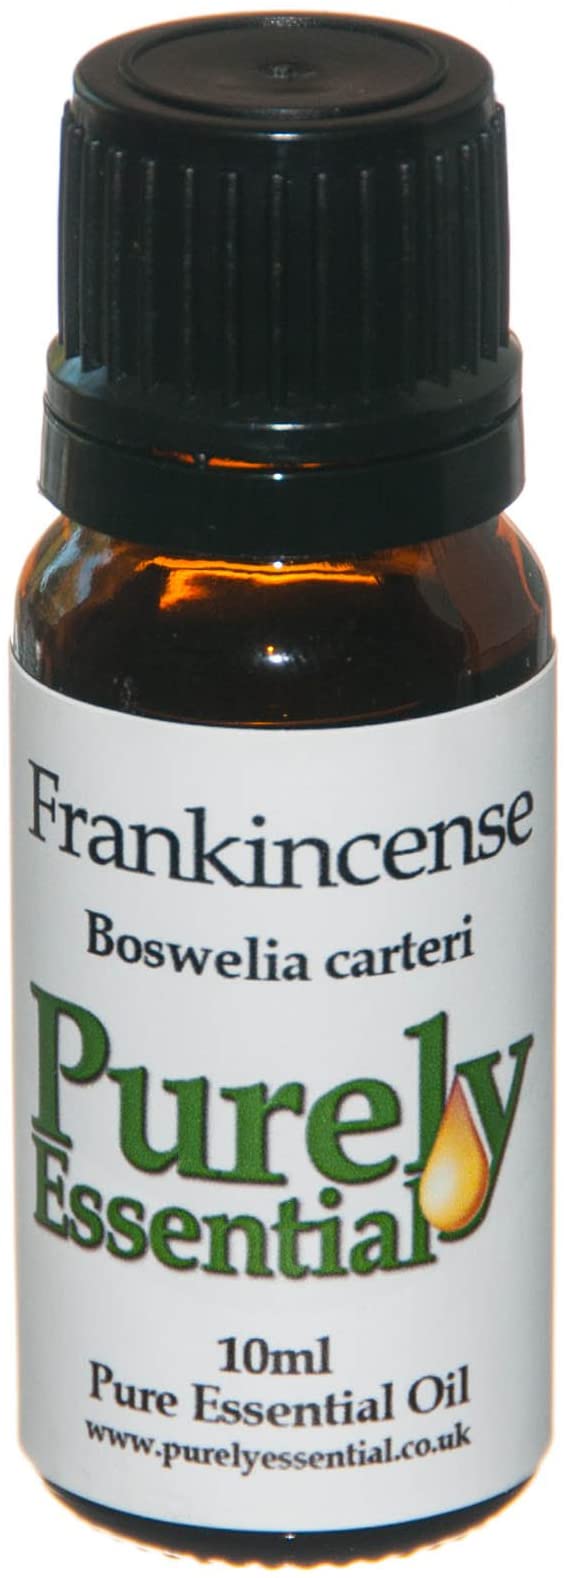 Frankincense Essential Oil 10ml Pure and Natural, Purely Essential